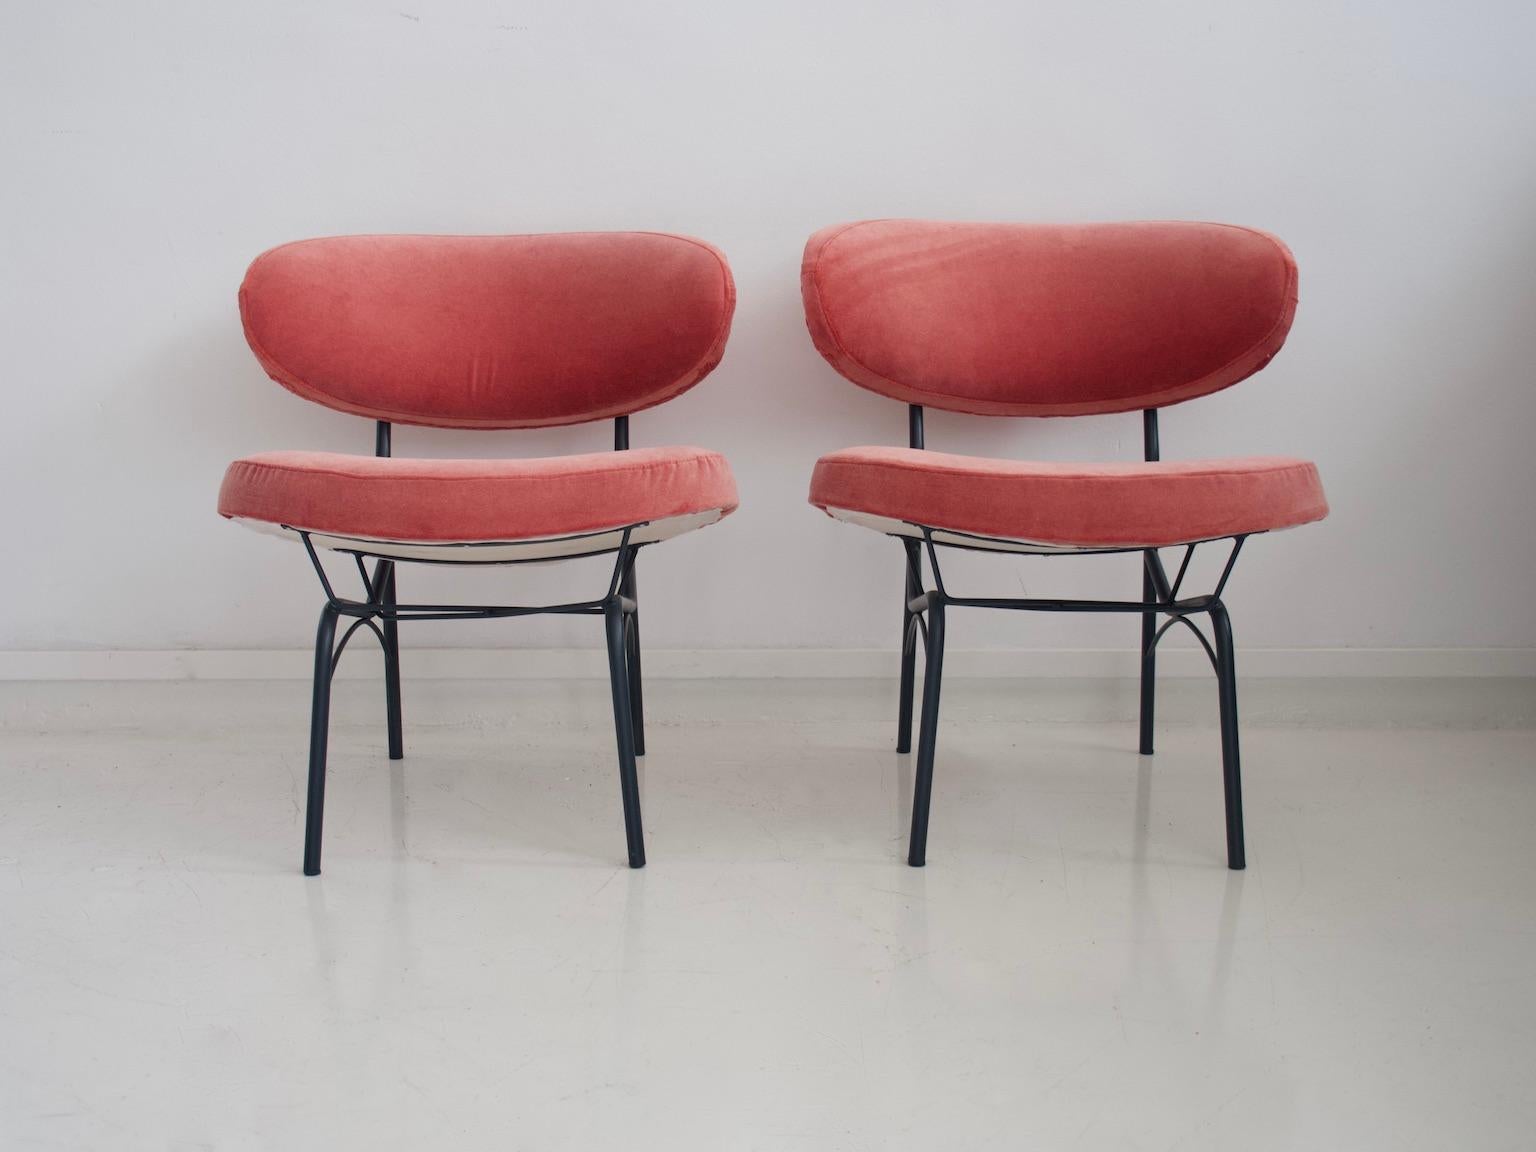 Pair of Italian made chairs from the 1950s. Seat and back newly upholstered with pink velvet. Metal feet have been restored and painted in black.